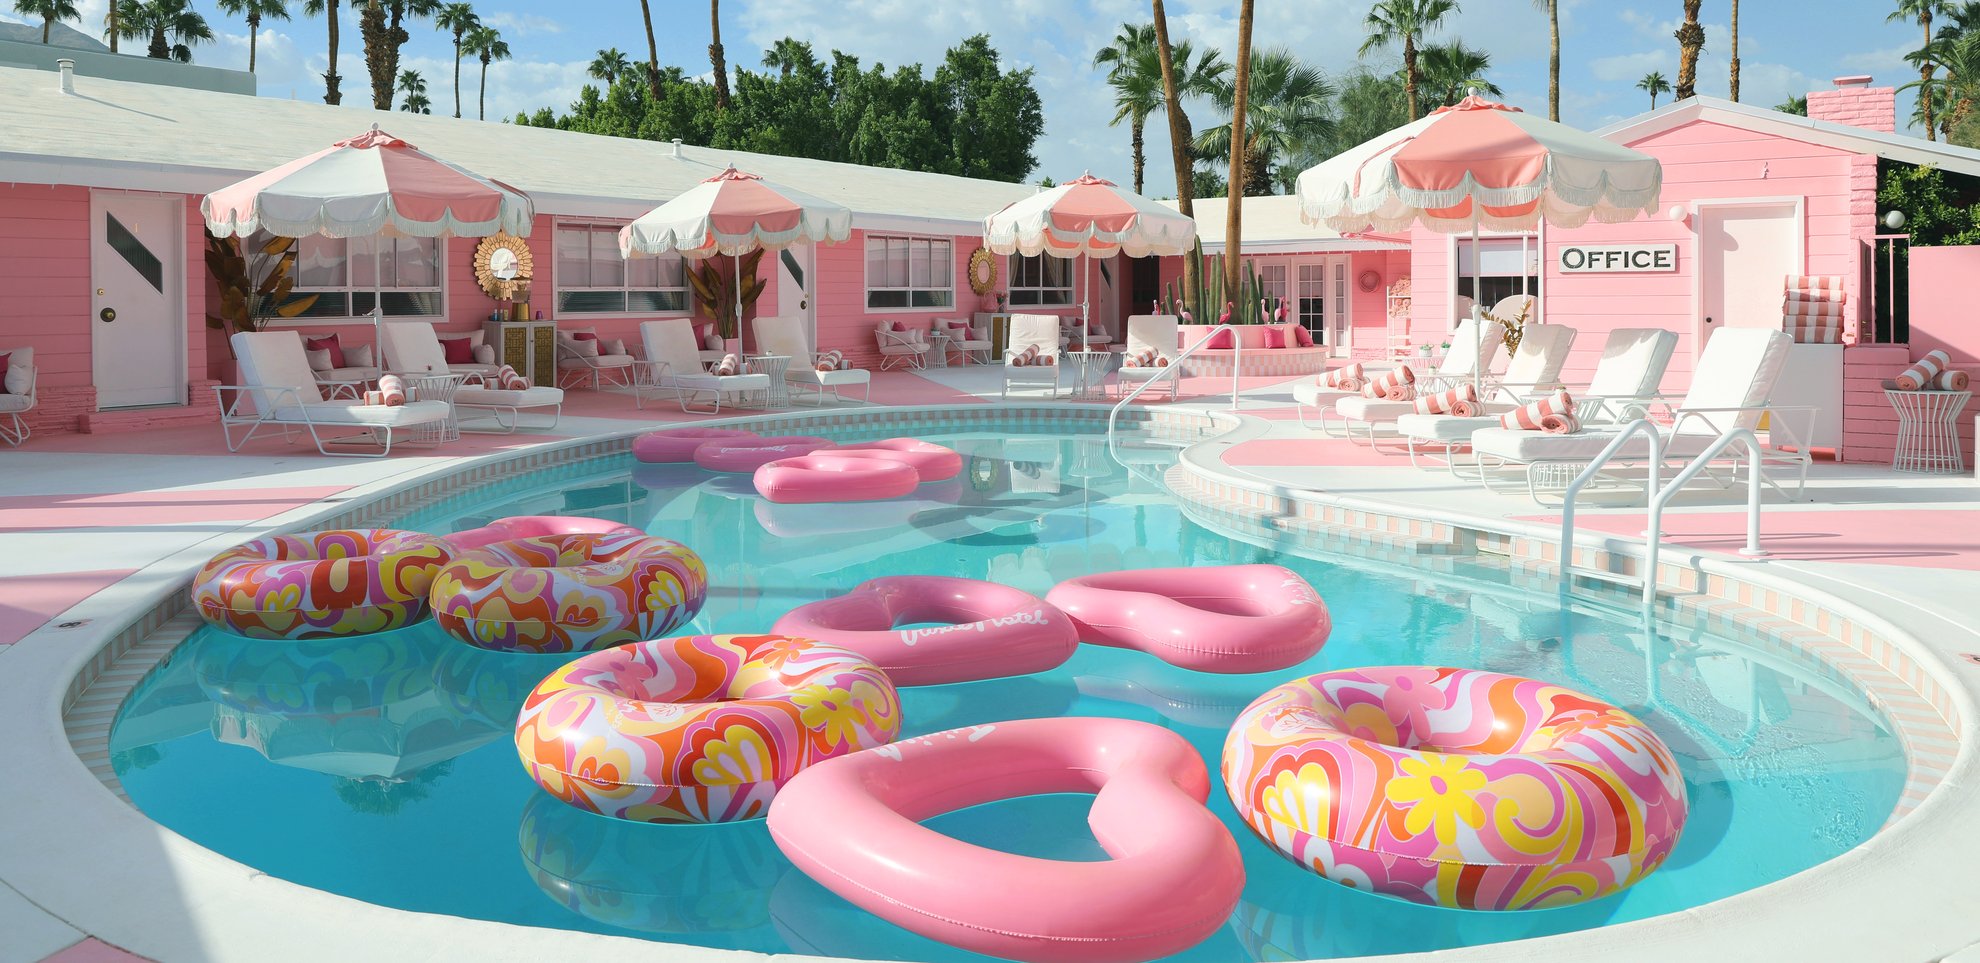 Pink heart shaped floats in the kidney-shaped pool at the Trixie Motel in Palm Springs, California